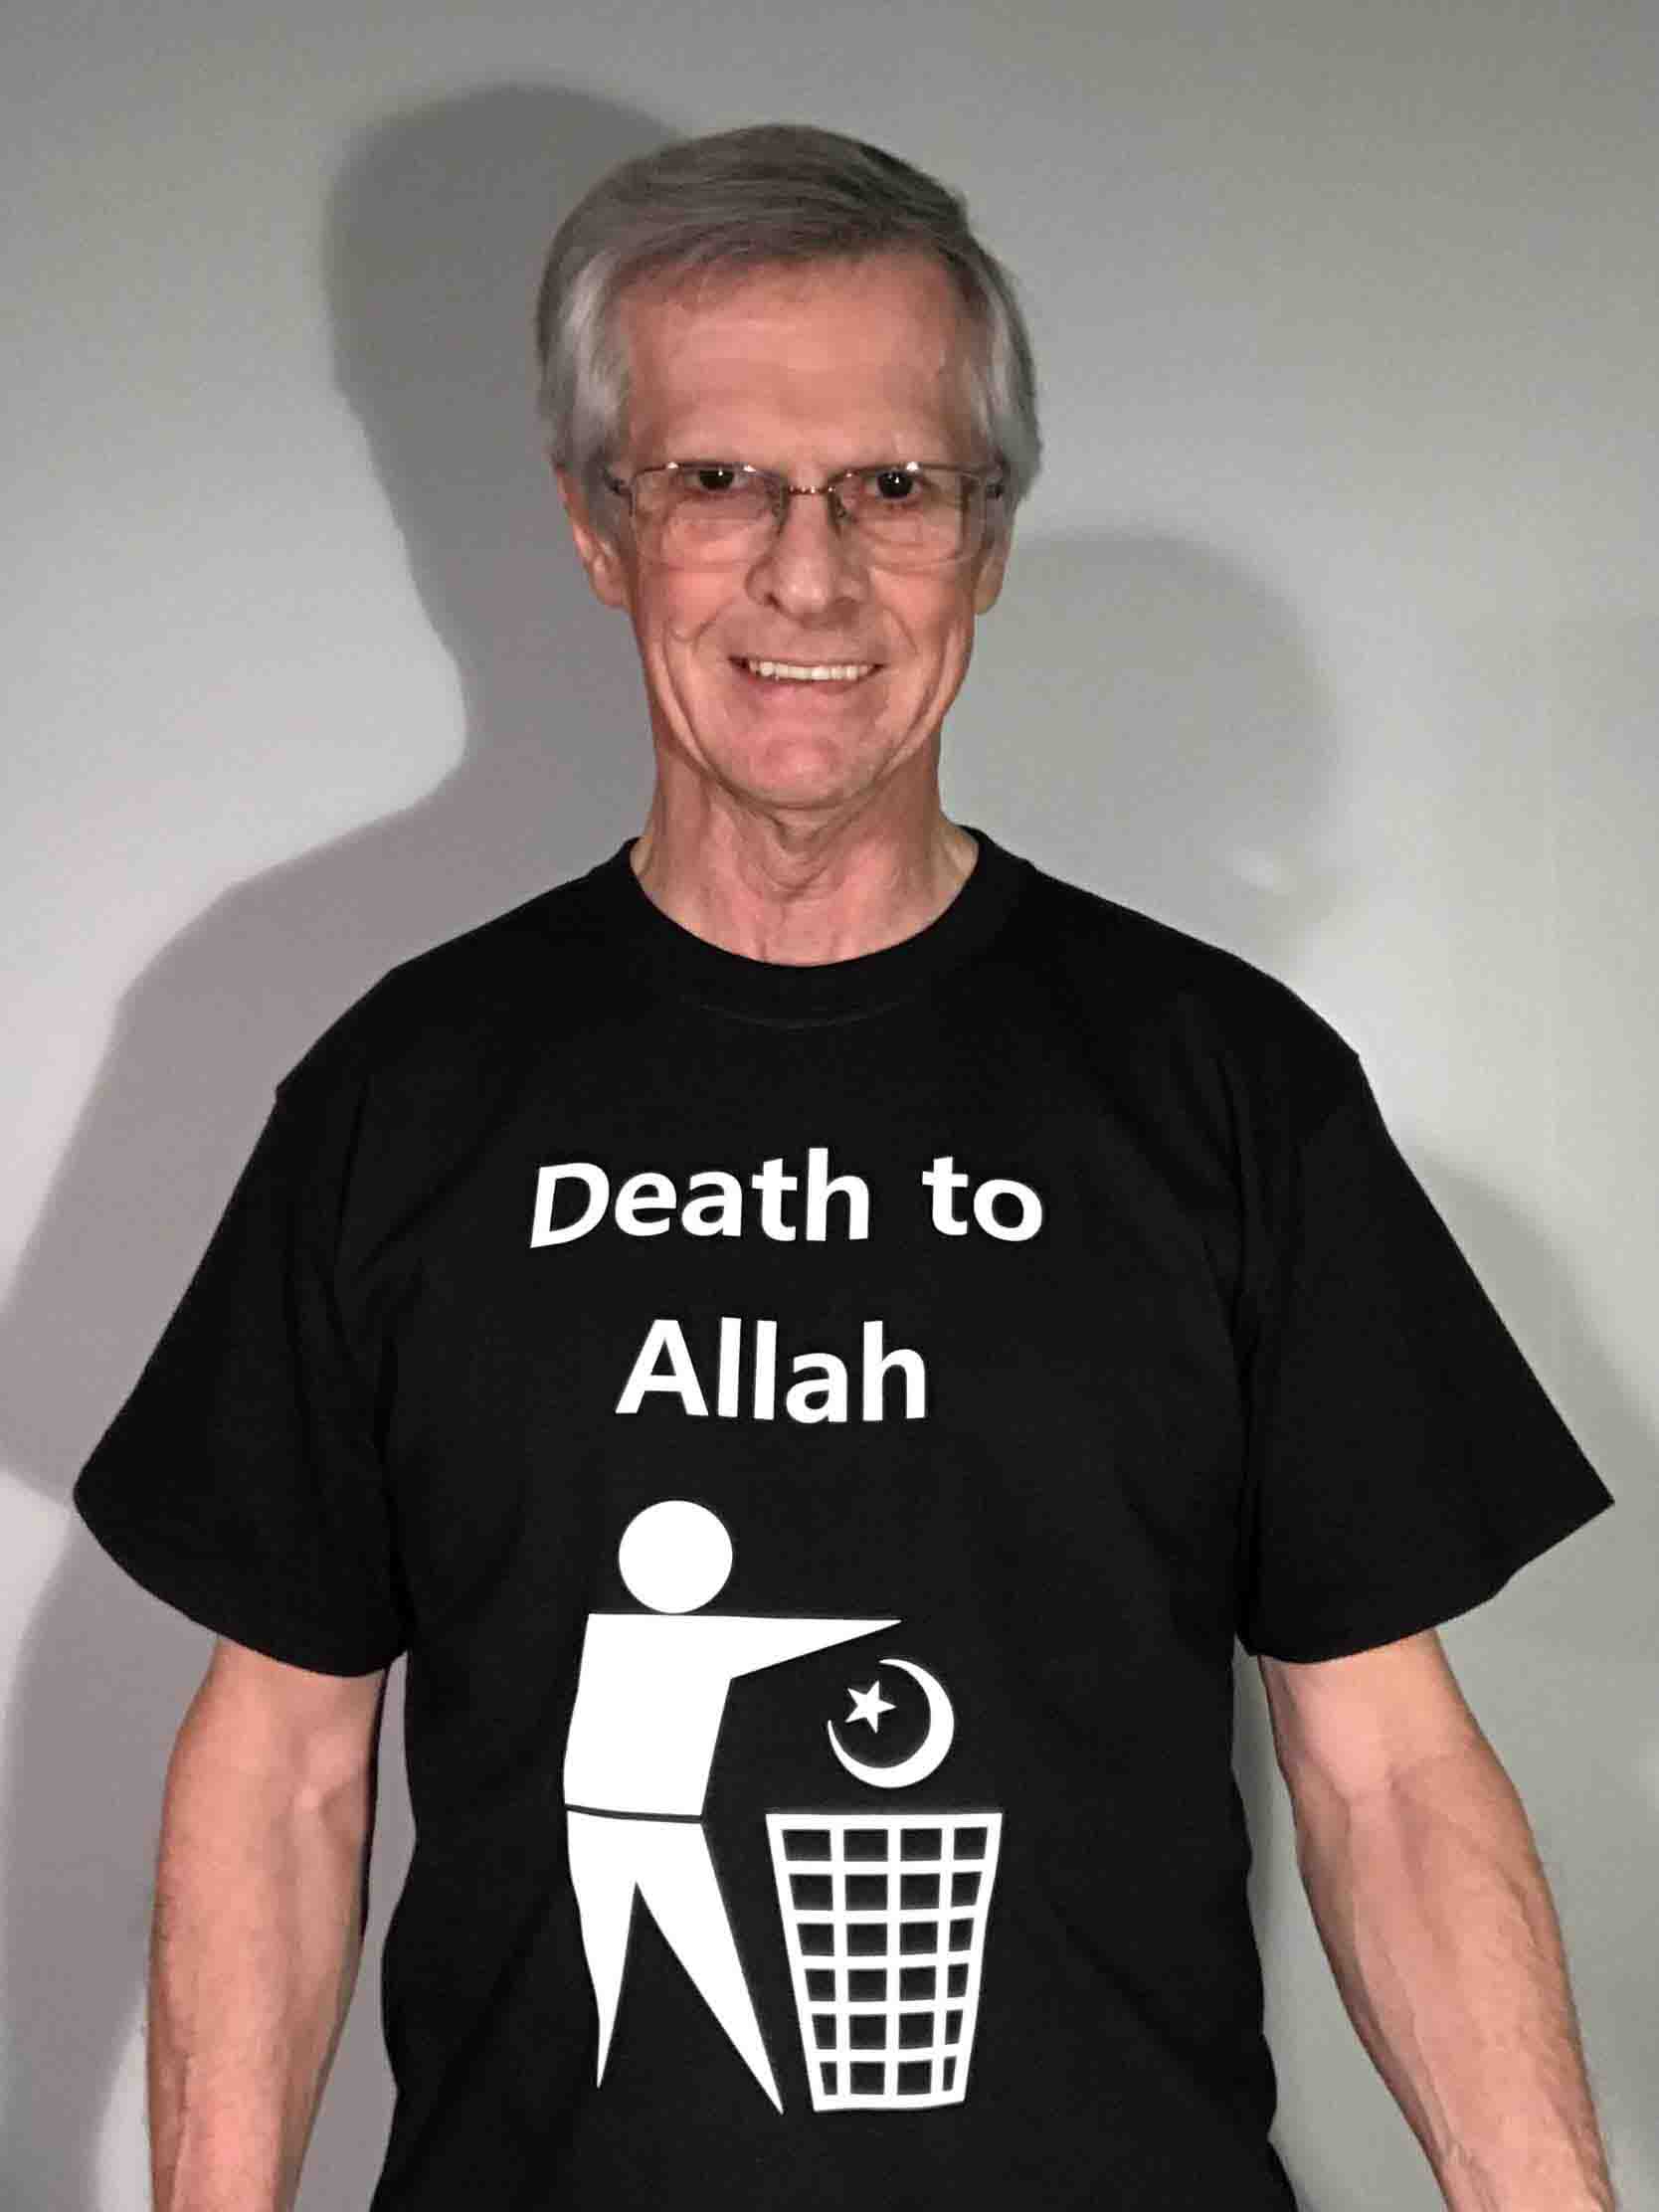 Darwin Bedford wearing his shirt that says 'death to Allah'